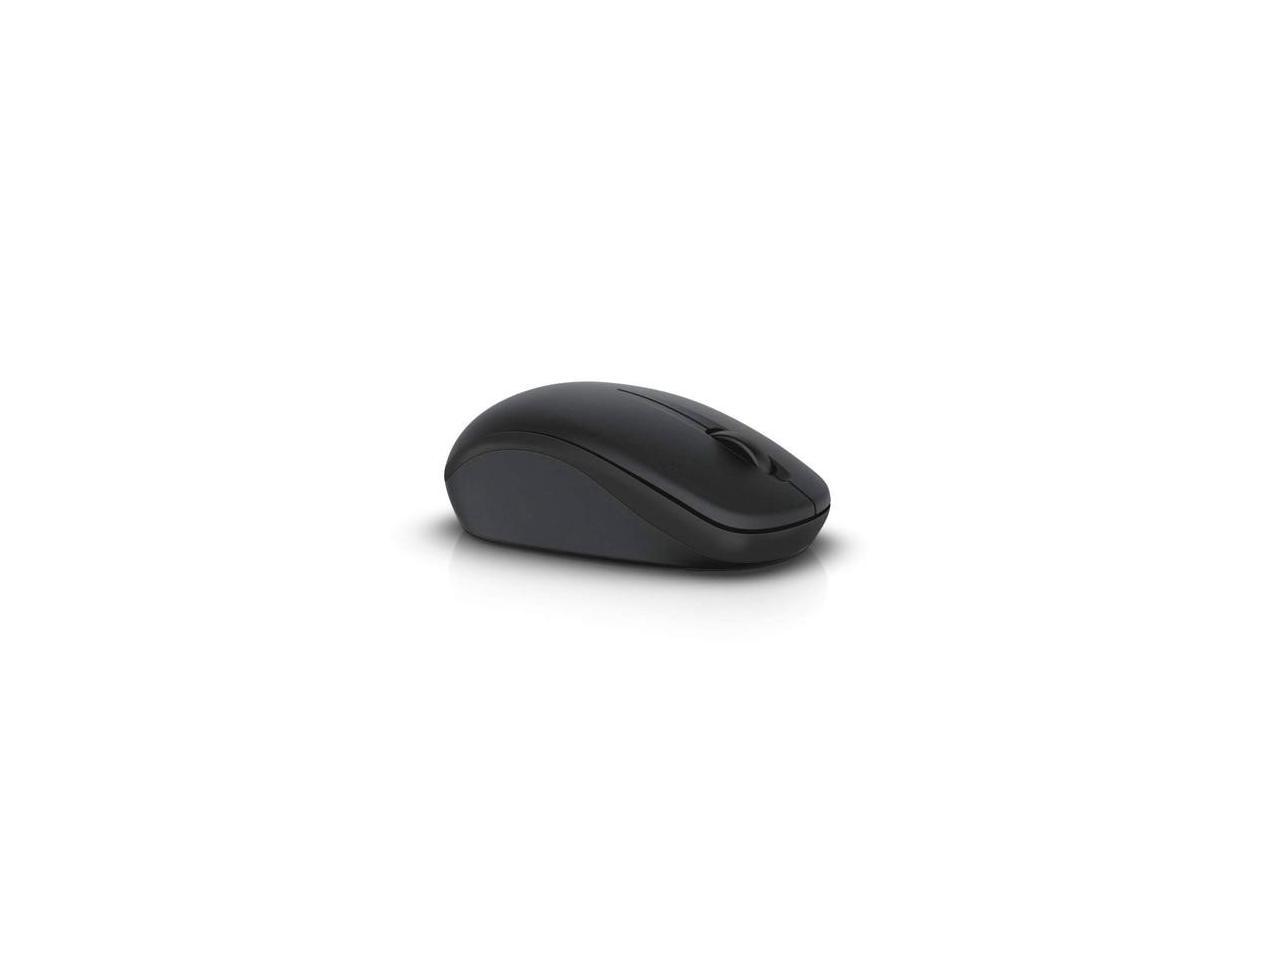 DELL WM126 NNP0G Black 3 Buttons 1 x Wheel USB RF Wireless Optical 1000 dpi Wireless Mouse - image 3 of 16